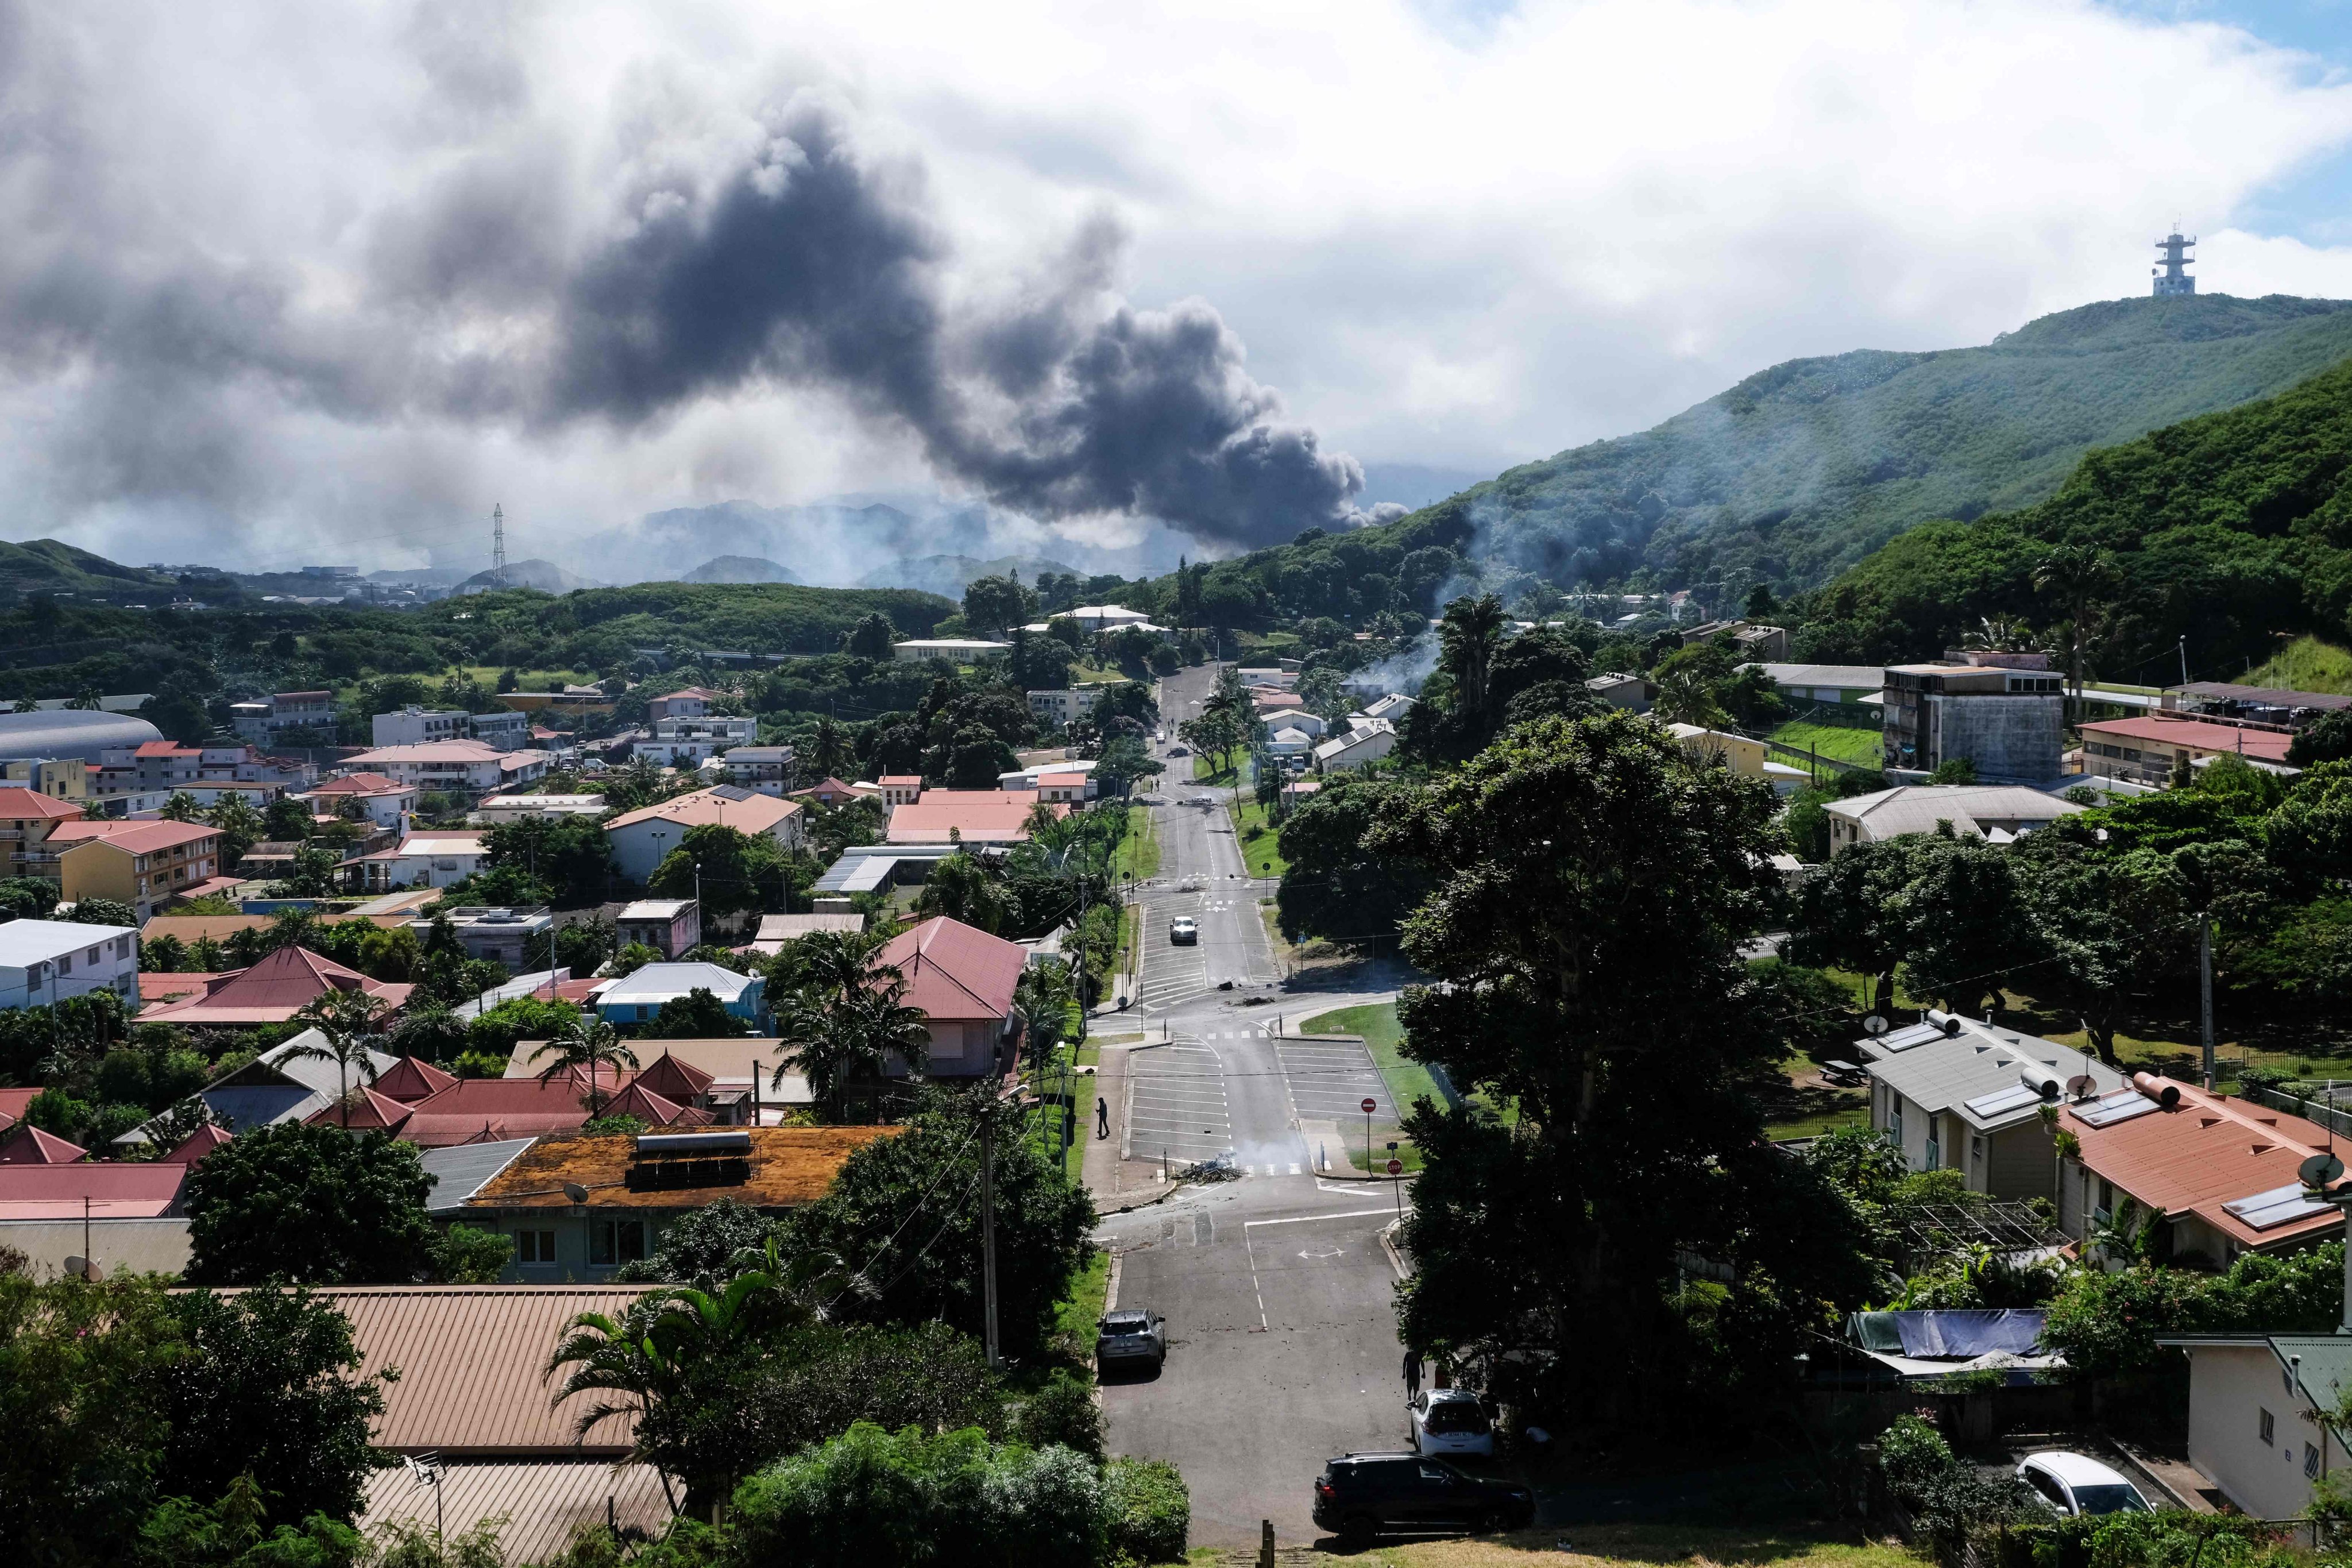 Smoke rises in the distance on Tuesday amid unrest in Noumea, New Caledonia, over a constitutional bill aimed at enlarging the electorate in the French overseas territory. Photo: AFP